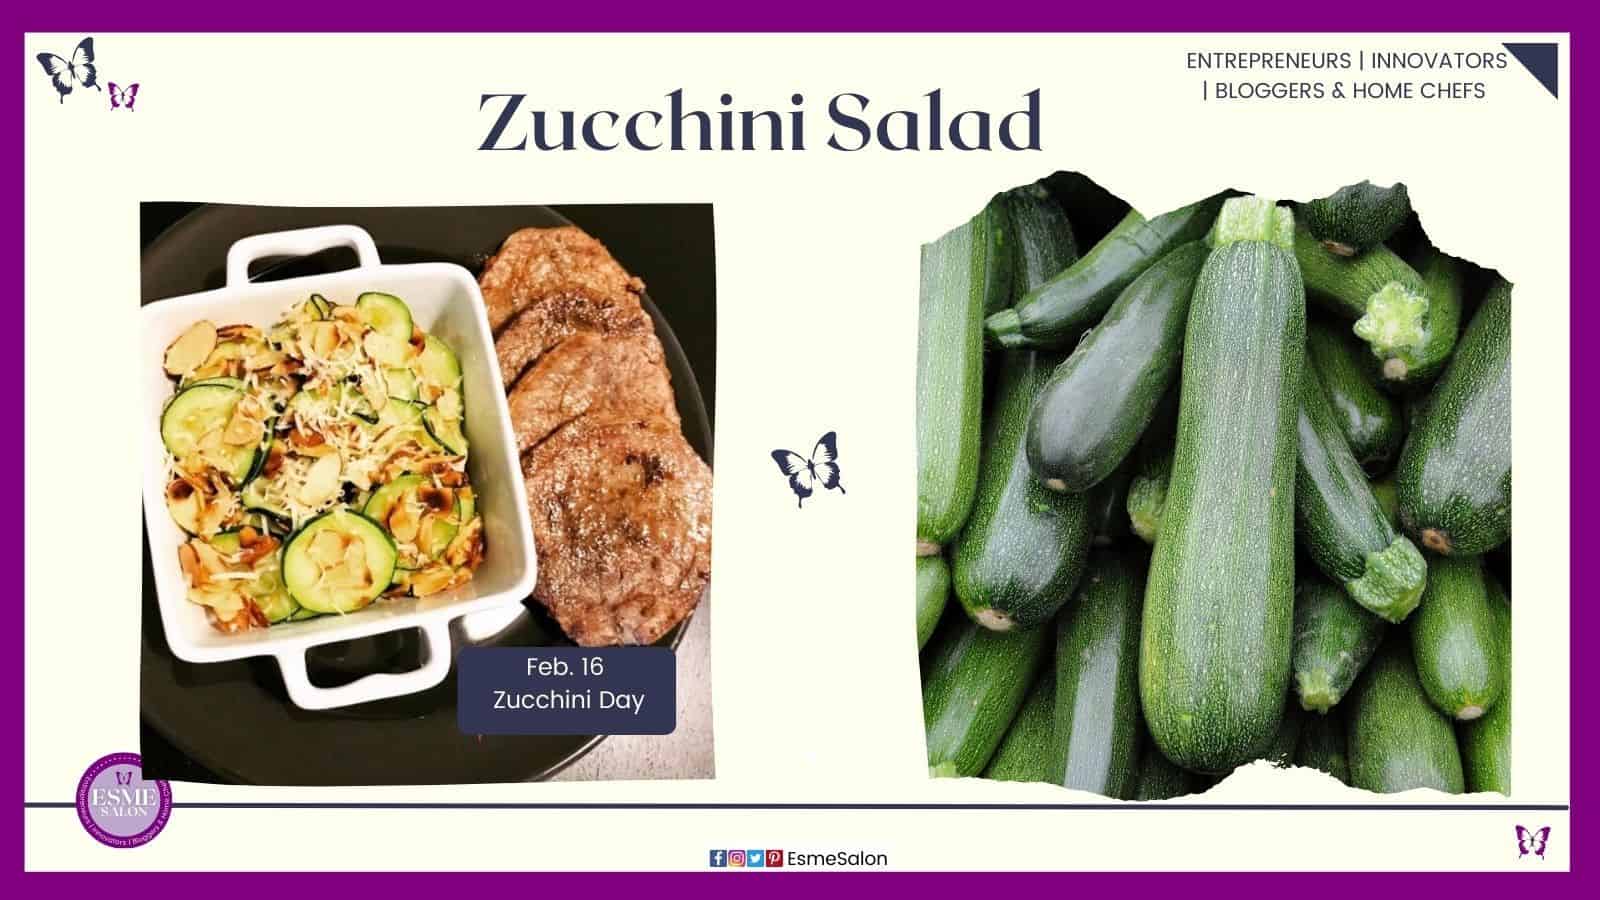 an image of a white square dish with Zucchini Salad served with steak dinner